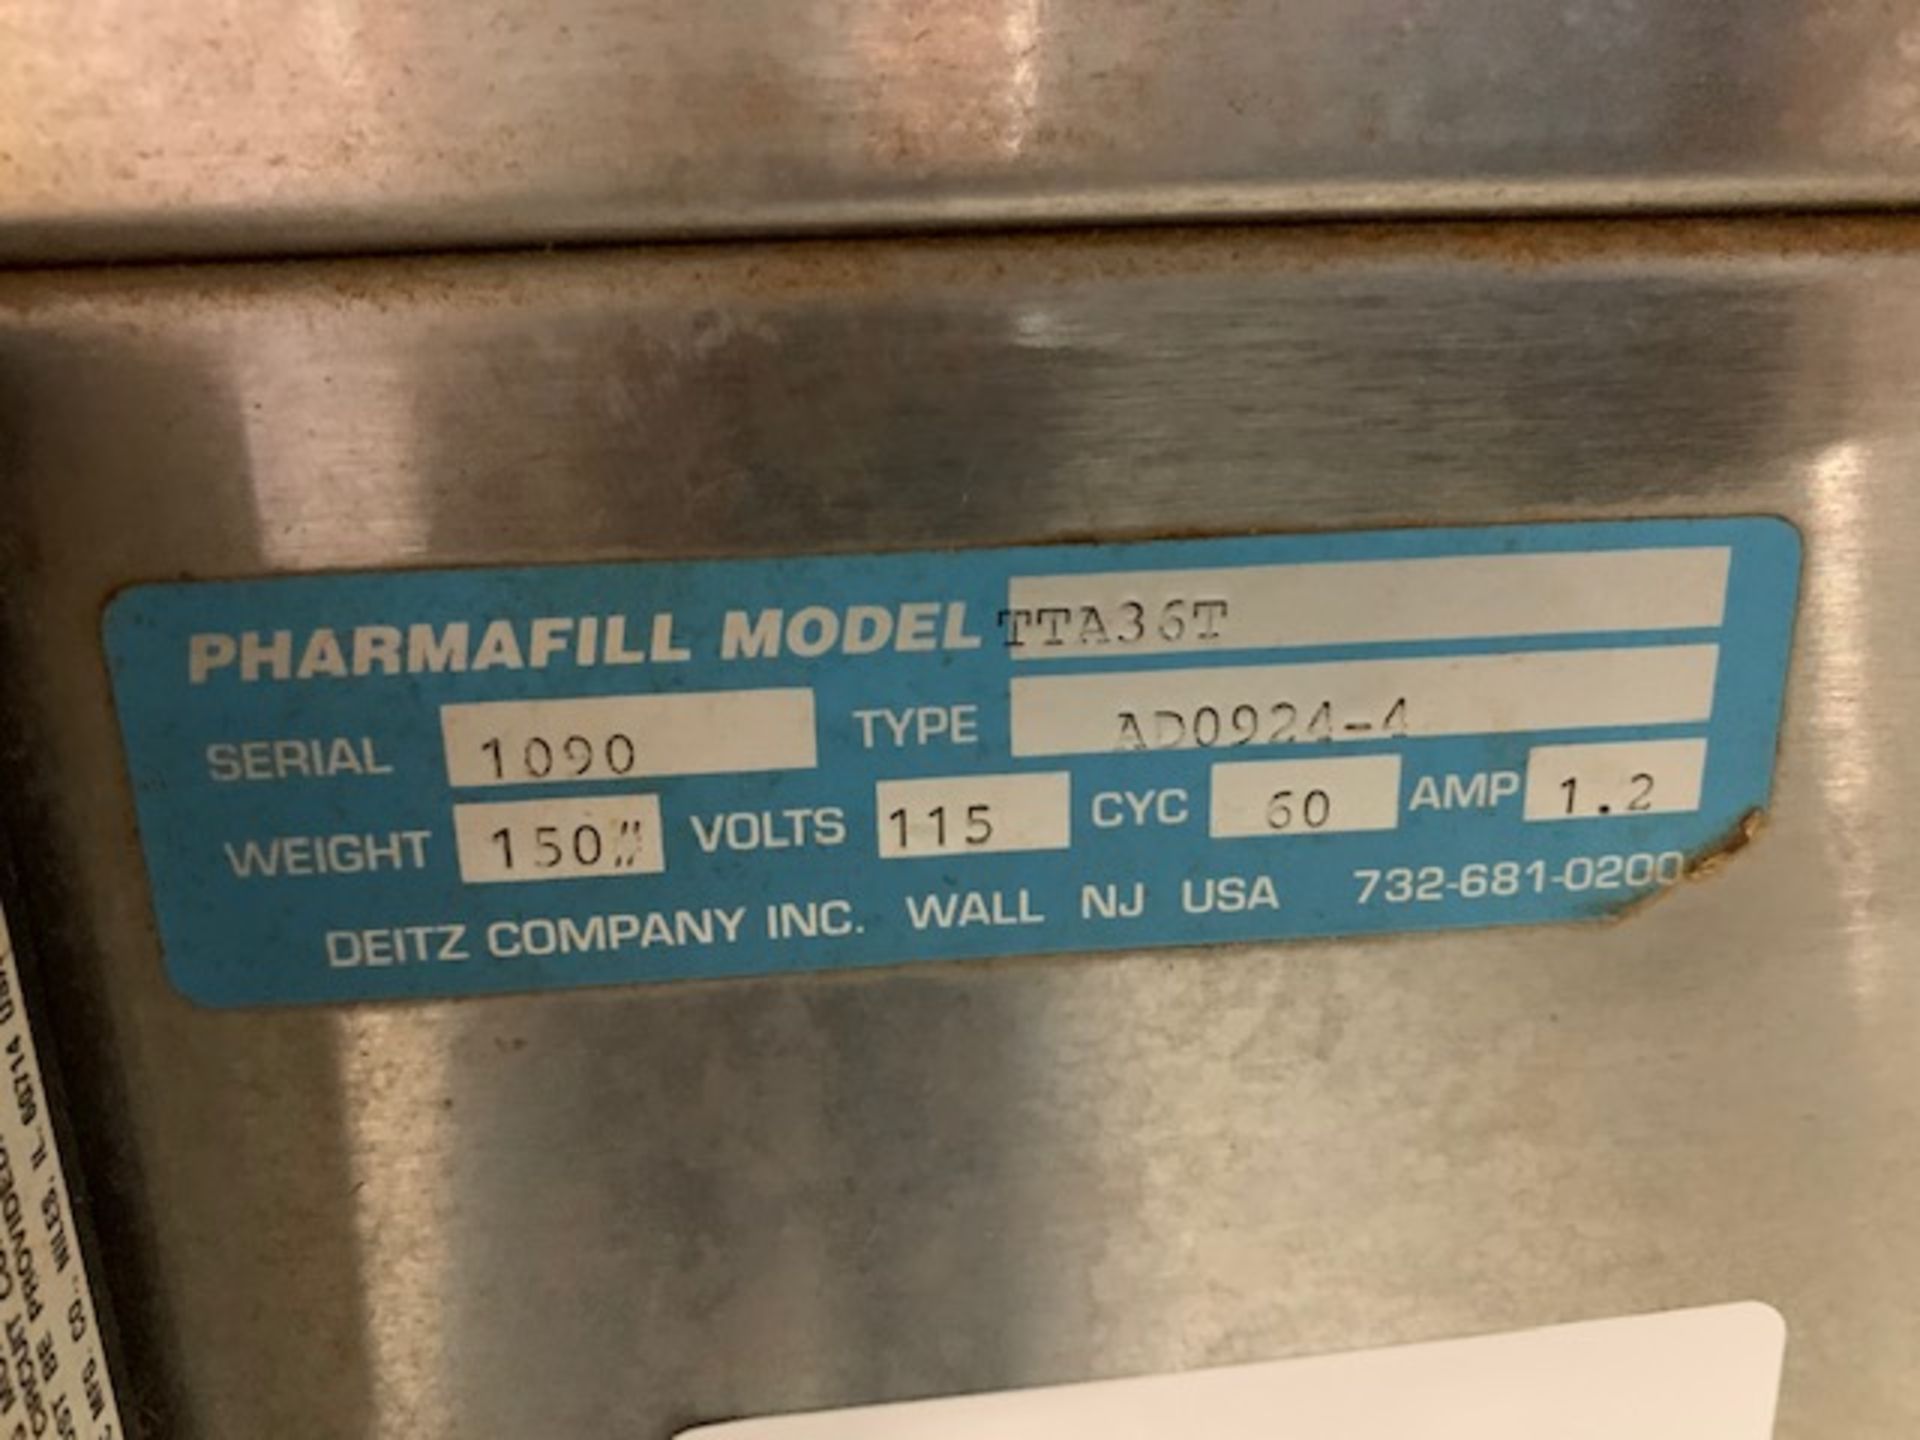 Pharmafil model TTA36T stainless steel Accumulating table 115 volts with DC variable speed - Image 4 of 4